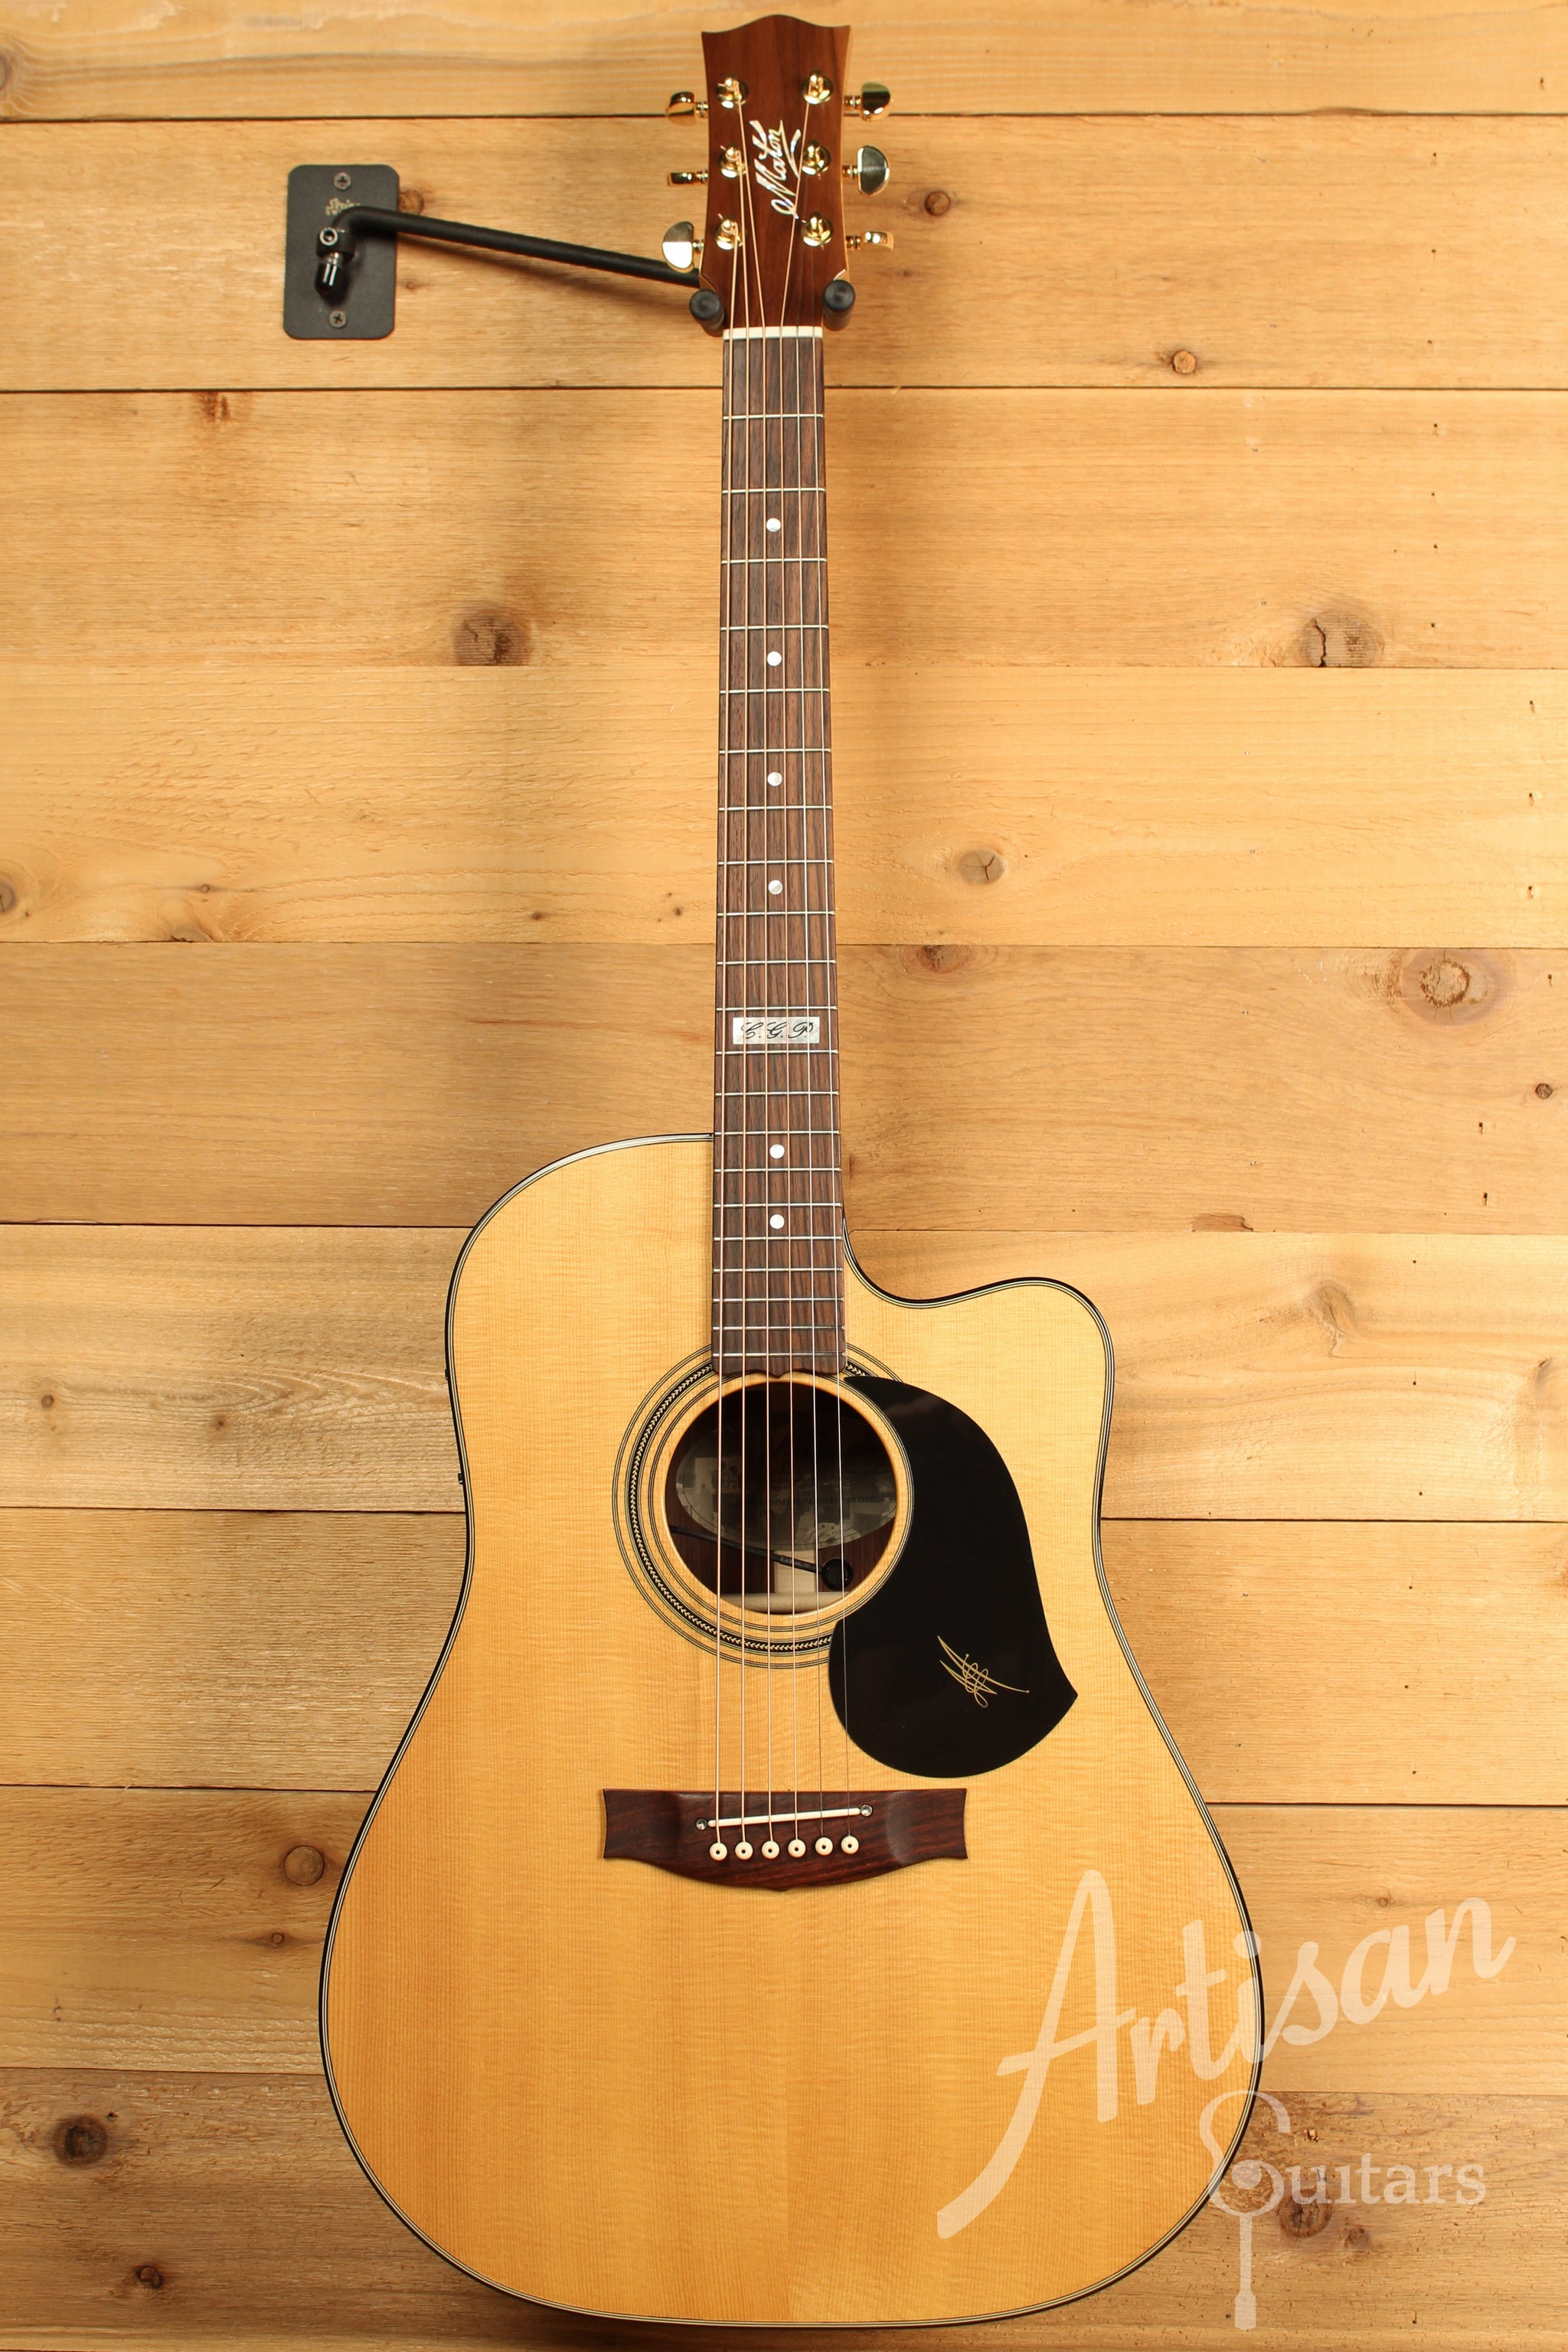 Maton TE 1 Guitar Tommy Emmanuel Artist Sitka Spruce and Indian Rosewood AP5 Pro Pre-Owned 2016 ID-11823 - Artisan Guitars